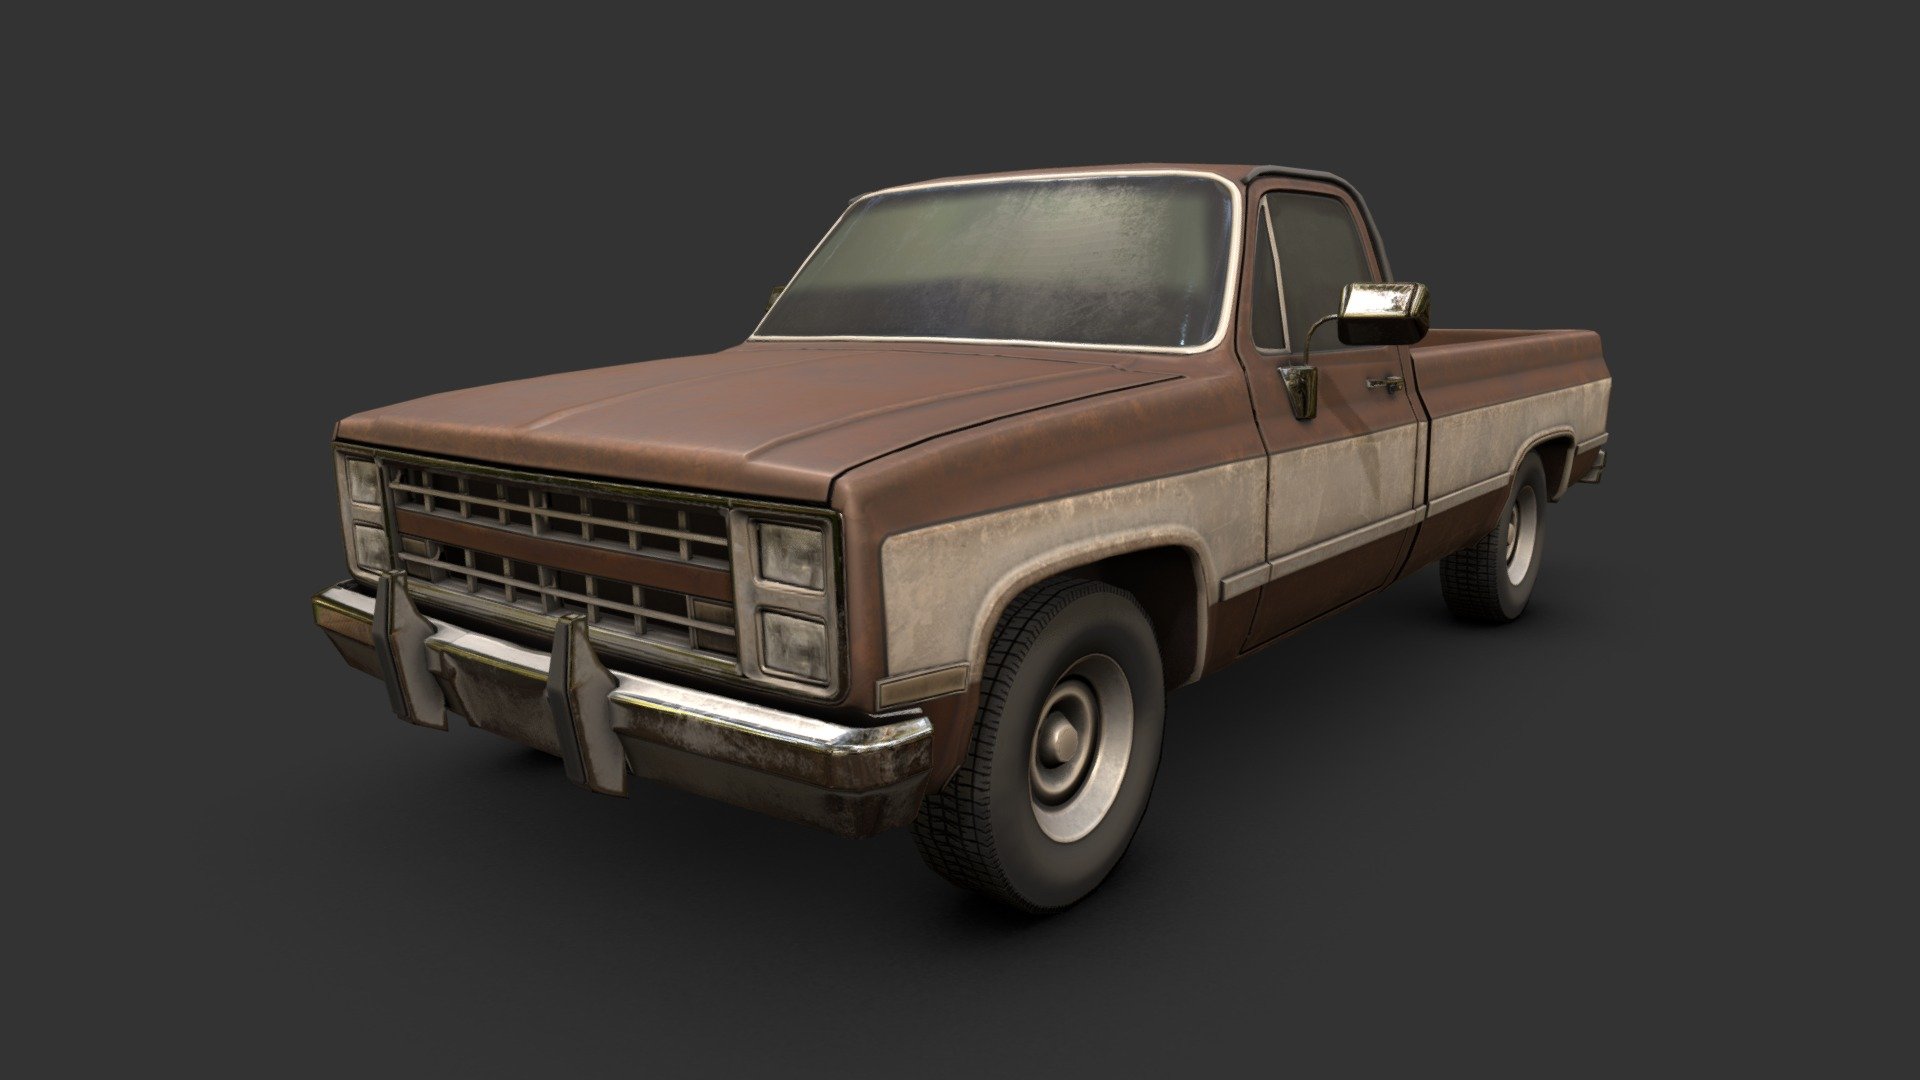 A standard fare 1980's truck, with a long bed and a two tone paint job. Modeled after my dad's truck, actually.

Made with 3DSMax, Topogun, and Substance Painter - 1980's Pickup - 3D model by Renafox (@kryik1023) 3d model